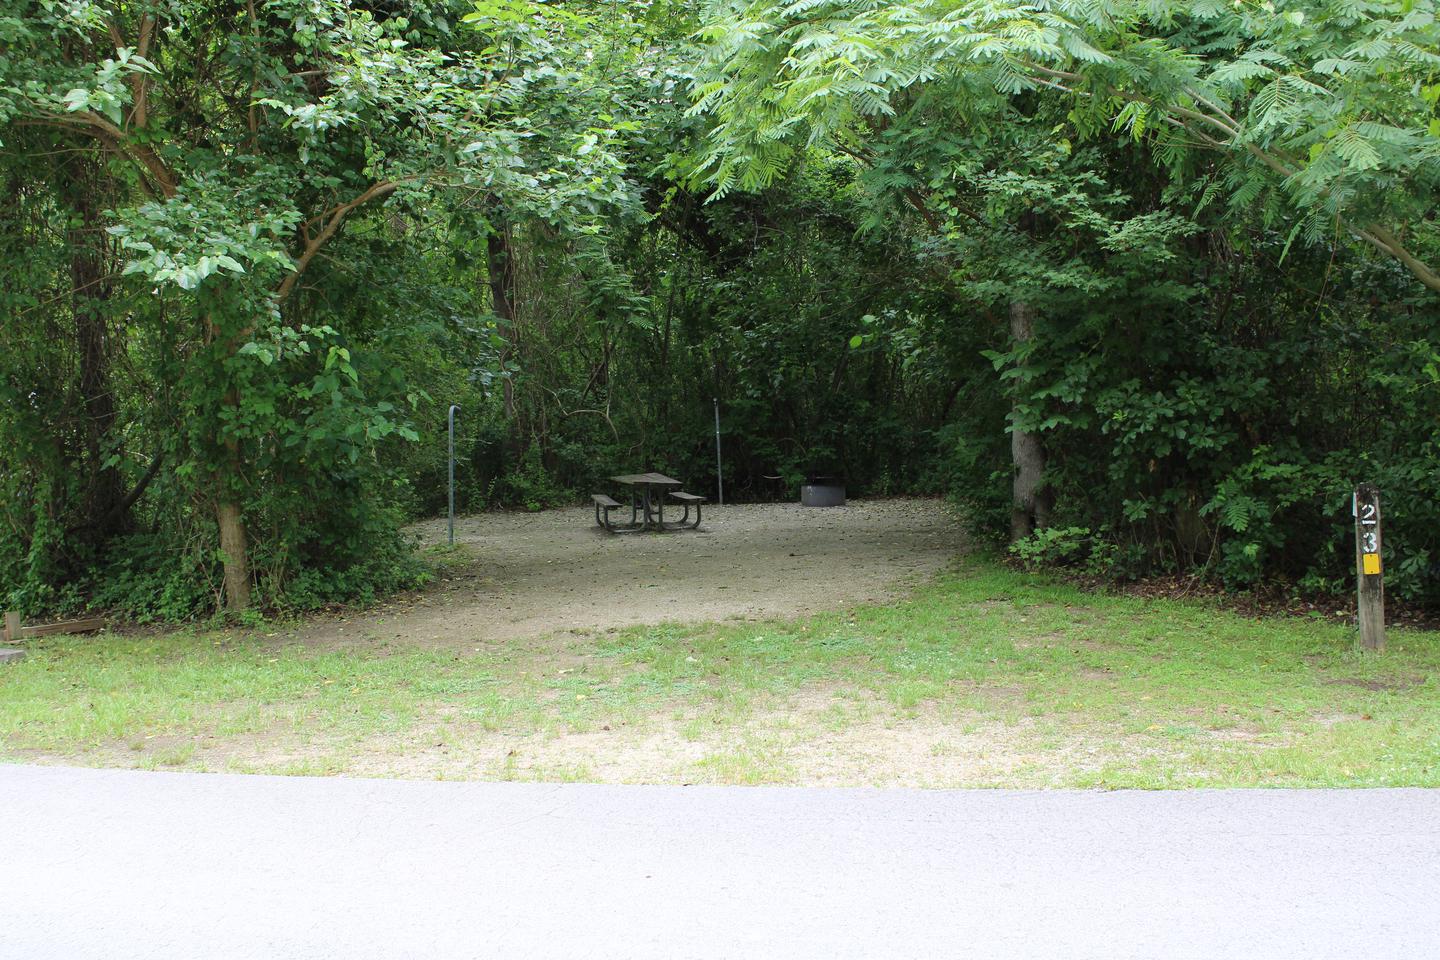 Flanners Beach Campsite #23Driveway for Campsite